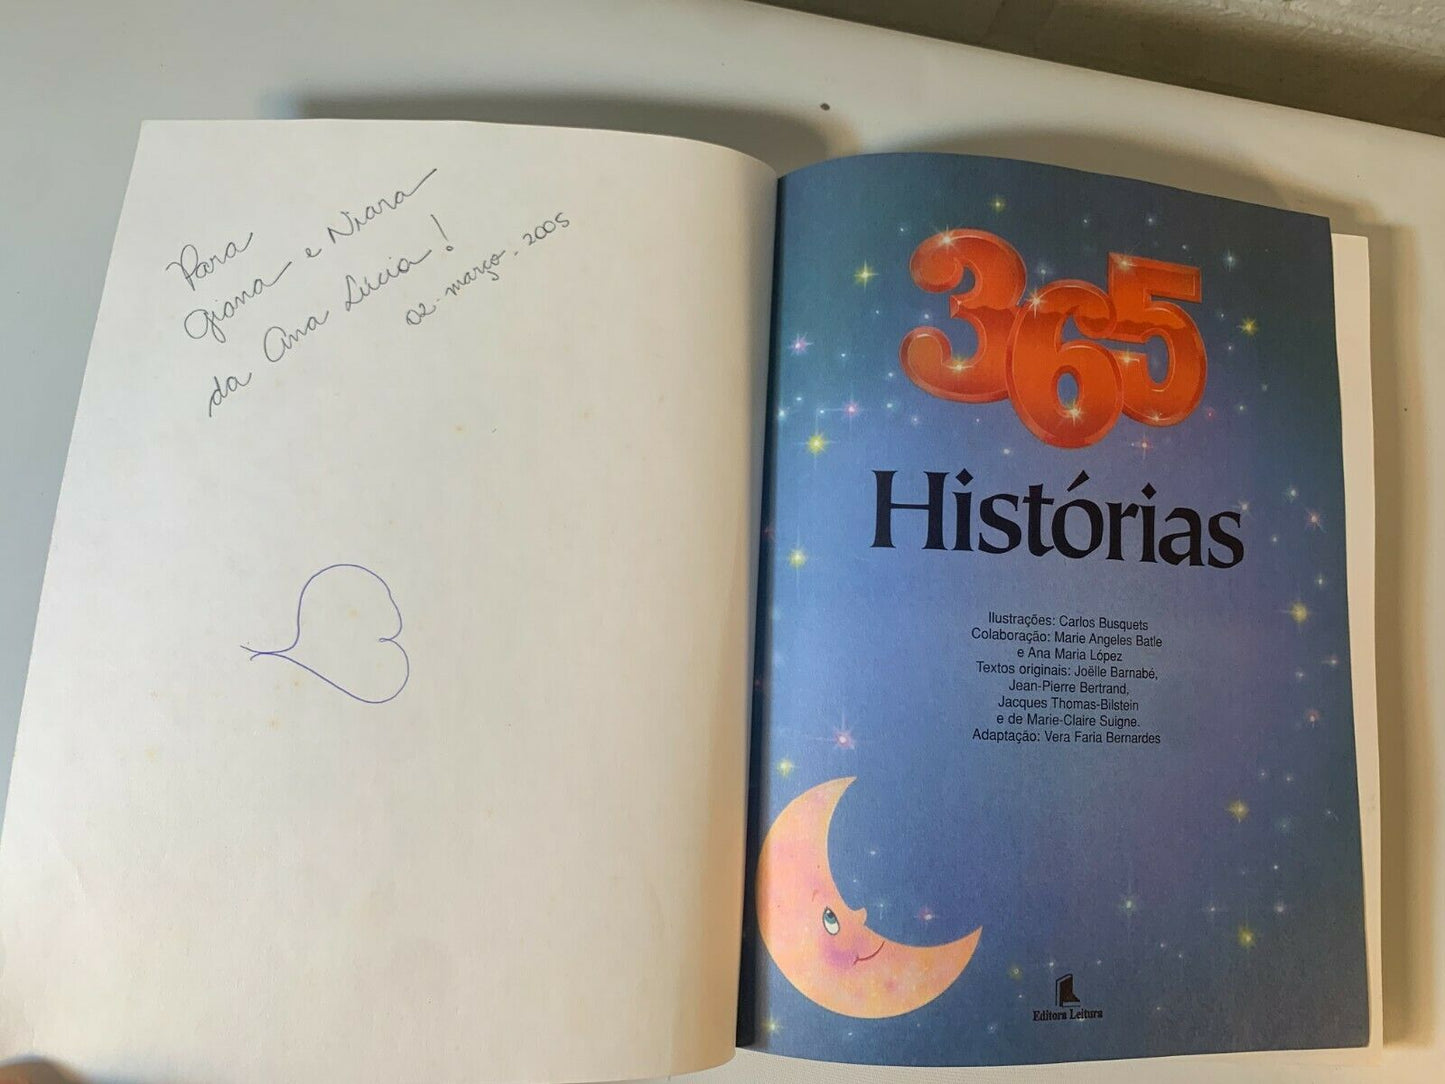 365 Historias, Illustracoes by Carlos Busquets [History of Children]